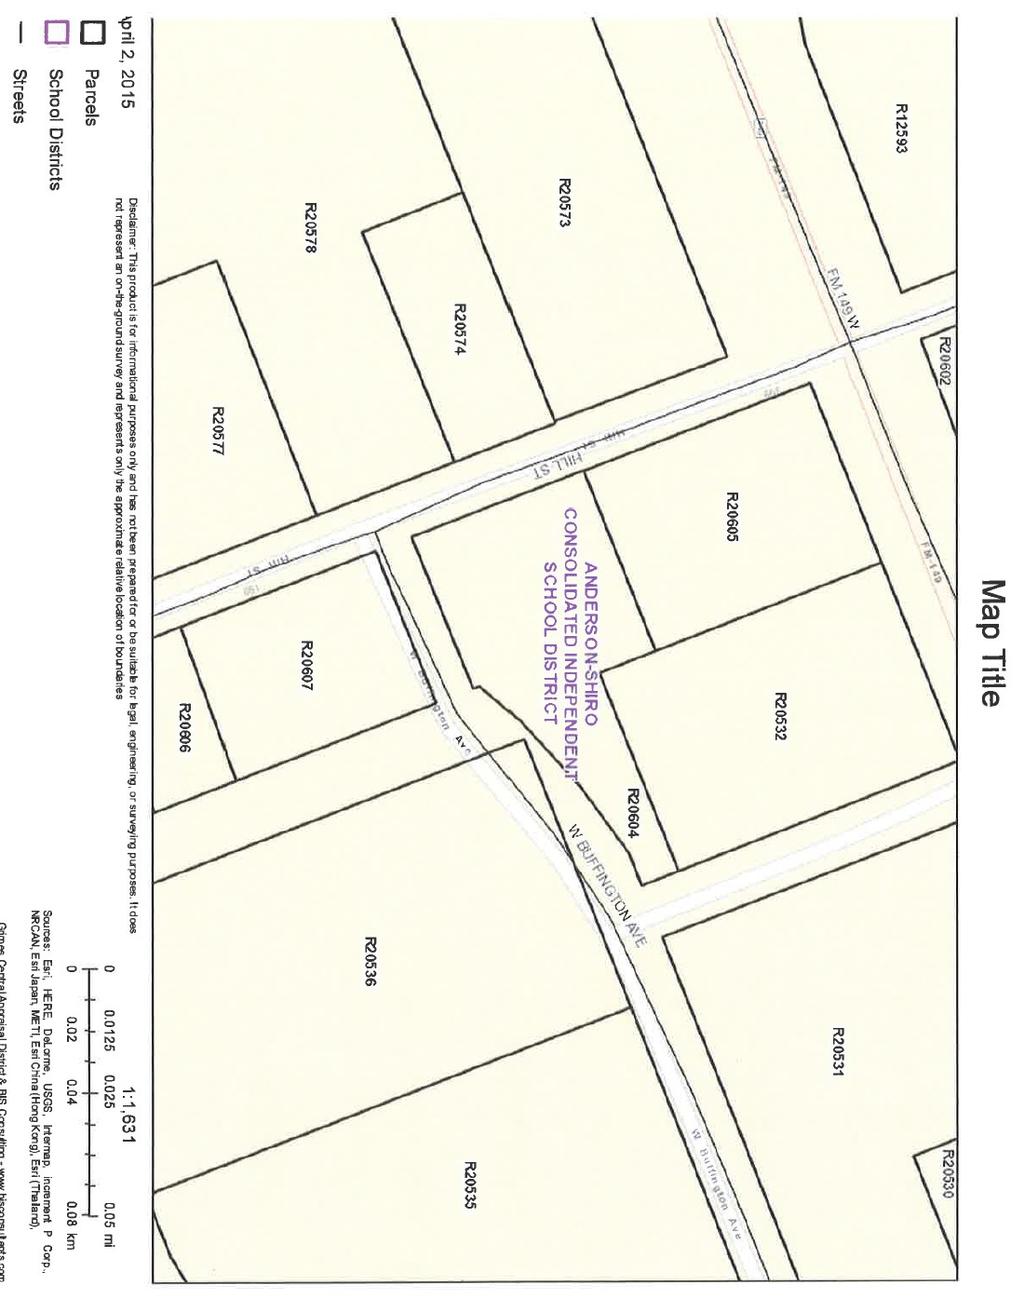 2 Map title shows property lines for Sheriff Sowell s property labeled R20532